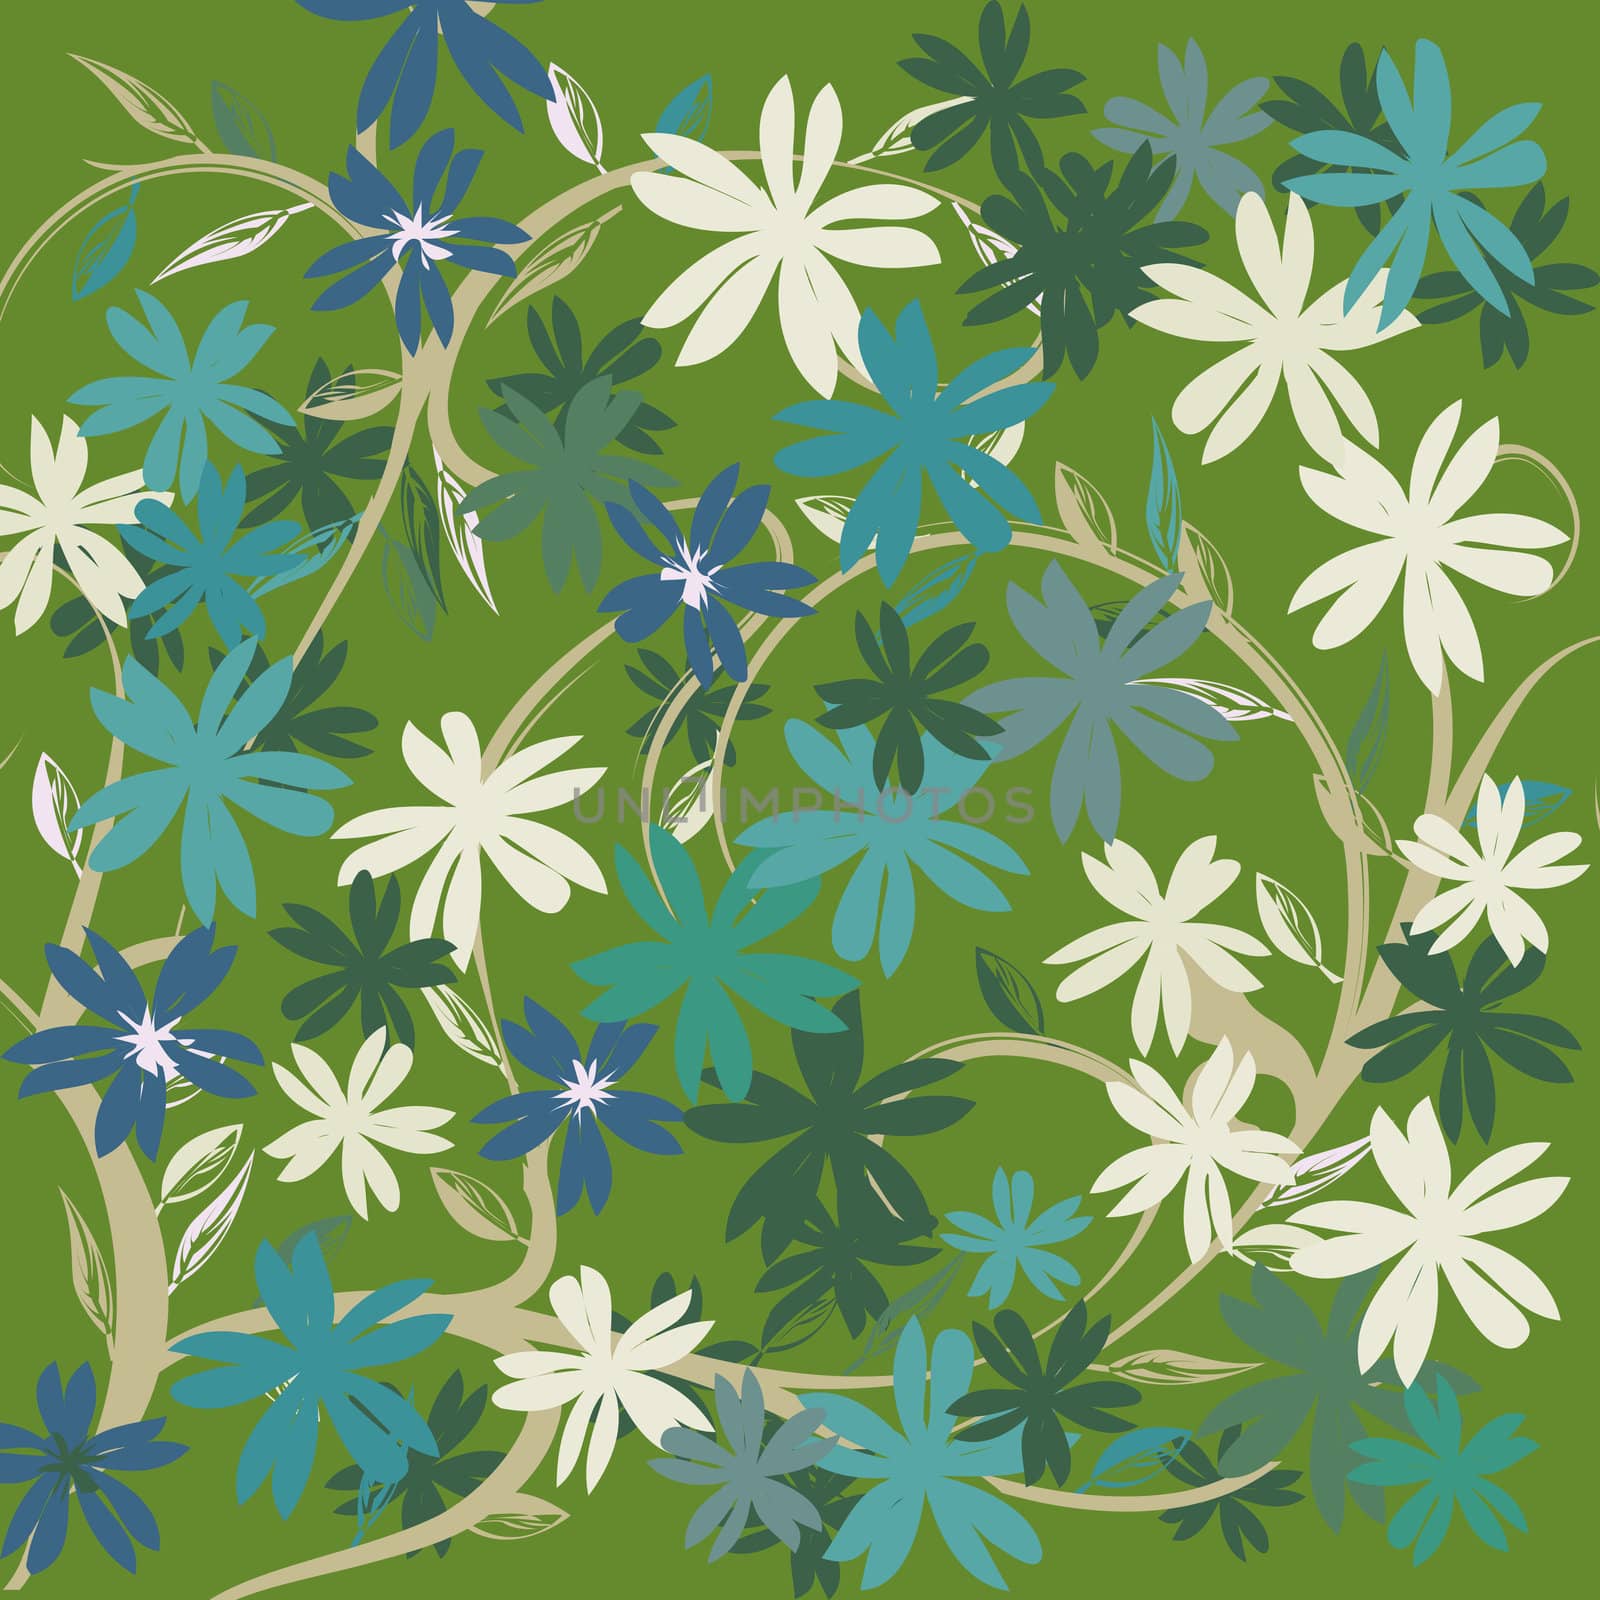 Background texture with floral motif